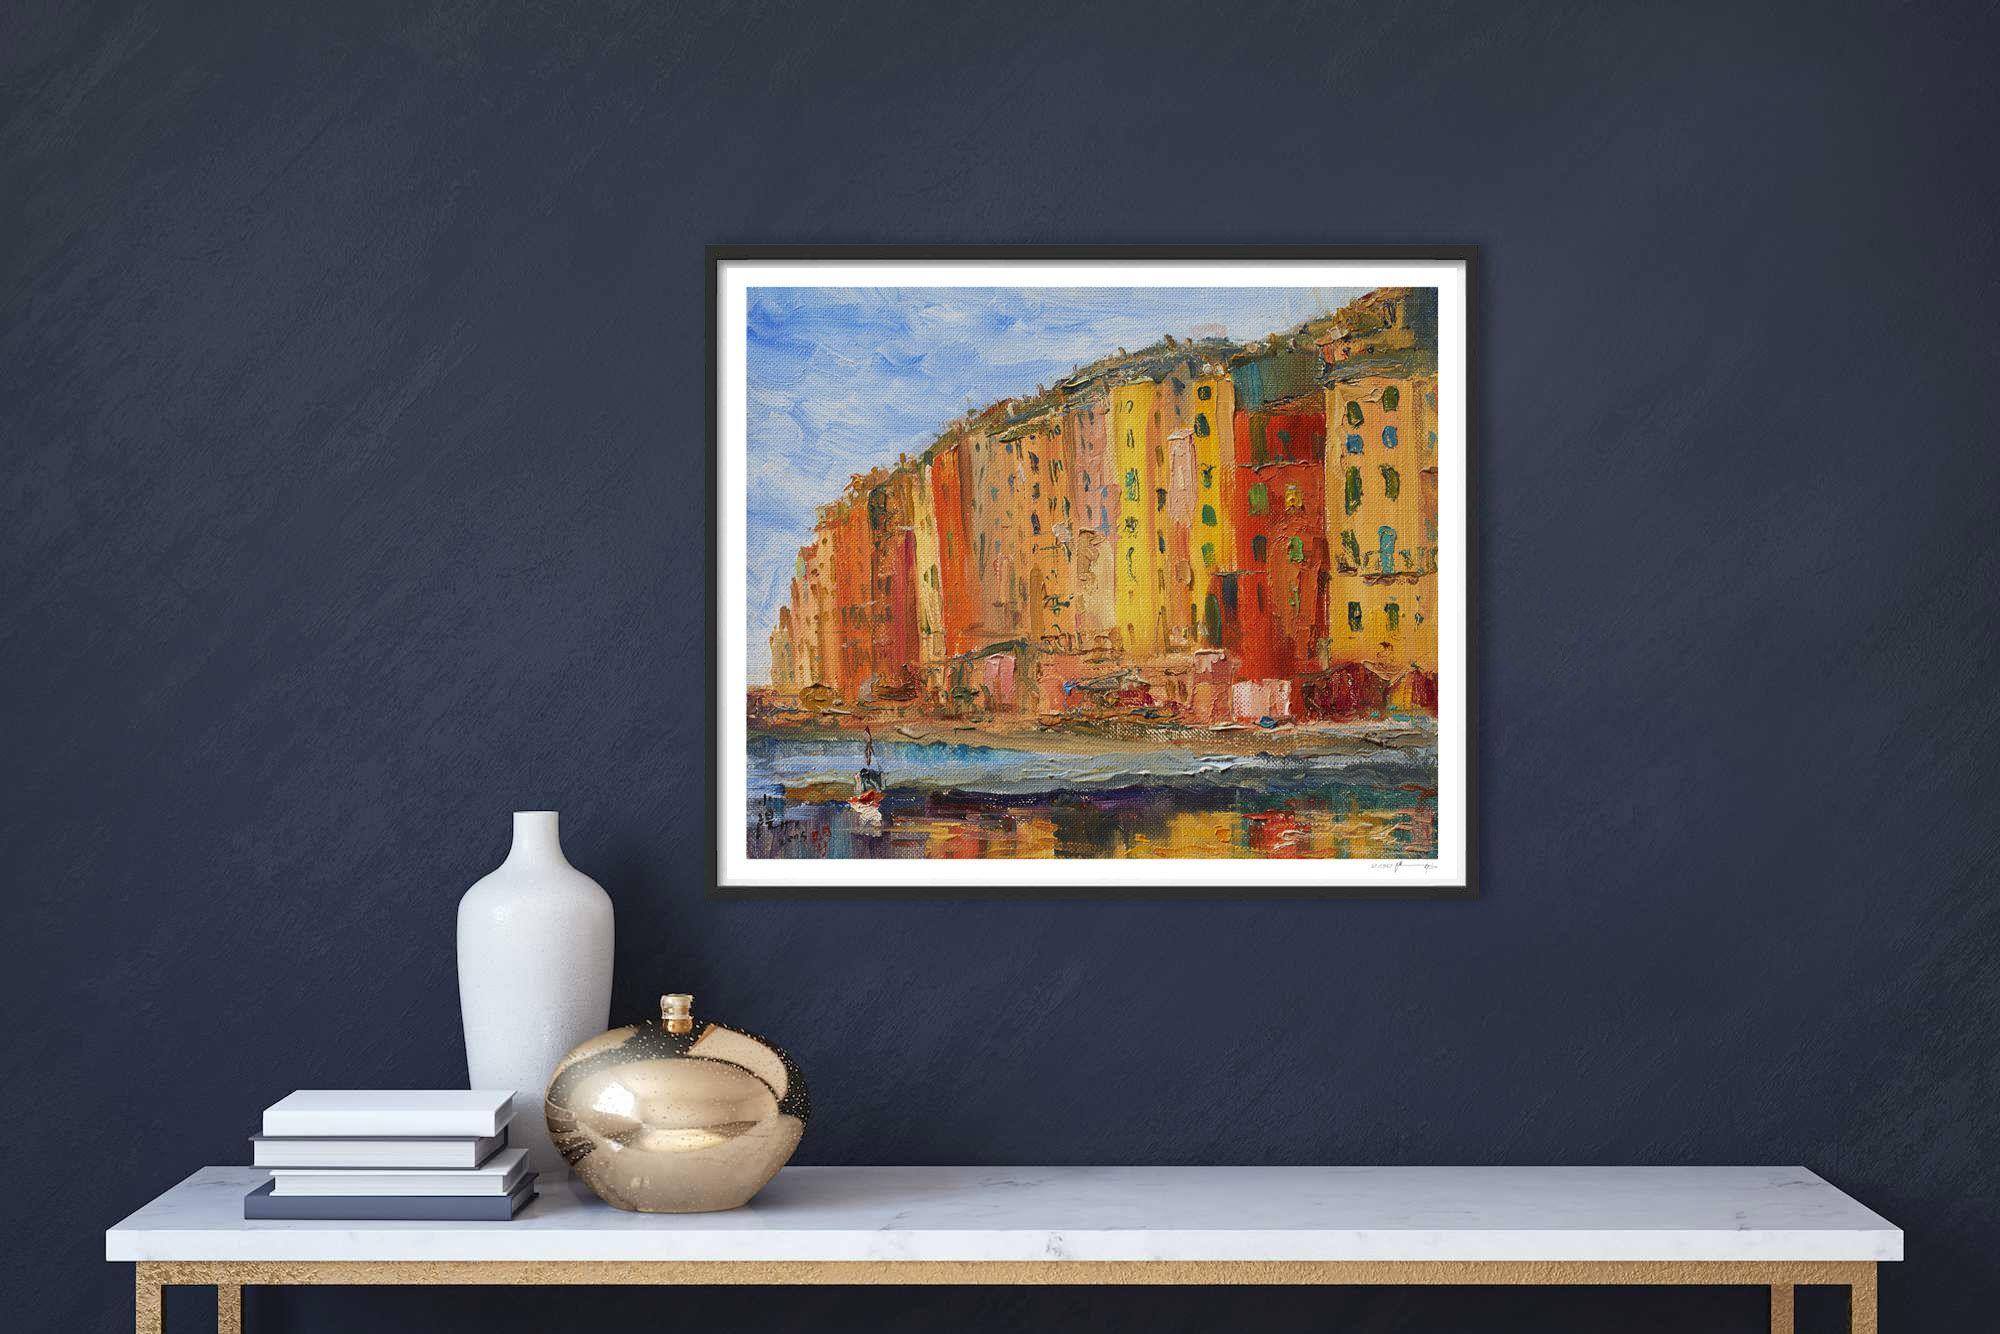 La joie - GiclÃe print on paper, Digital on Paper - Impressionist Print by Xiaoyang Galas